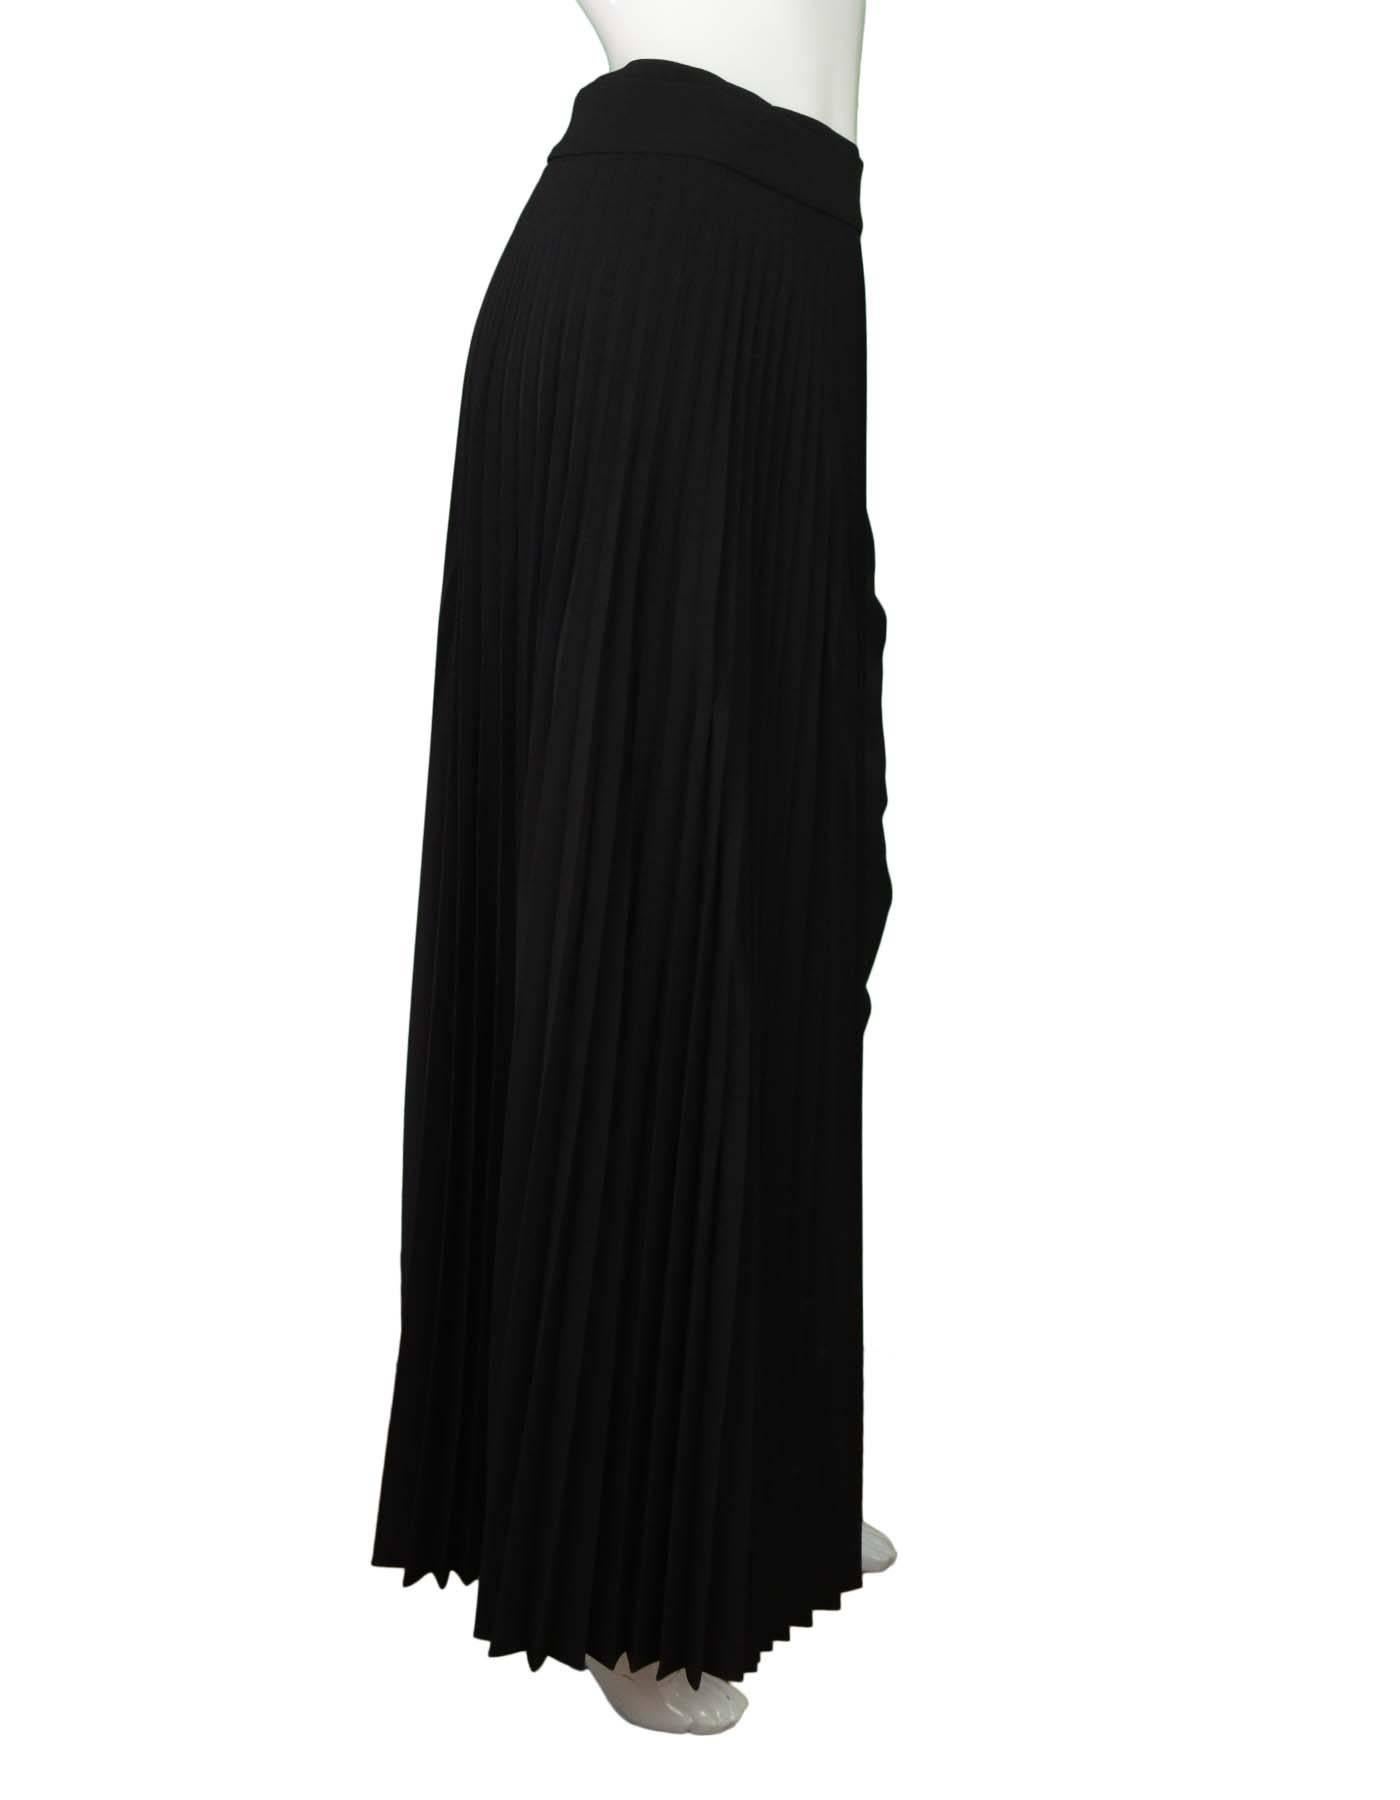 Brunello Cucinelli Black Long Pleated Wrap Skirt 
Features pleated panel and non-pleated panel
Made In: Italy
Color: Black
Composition: 52% wool, 40% polyester, 5% polyamide, 3% elastane
Lining: 68% acetate, 32% polyester
Closure/Opening: Side